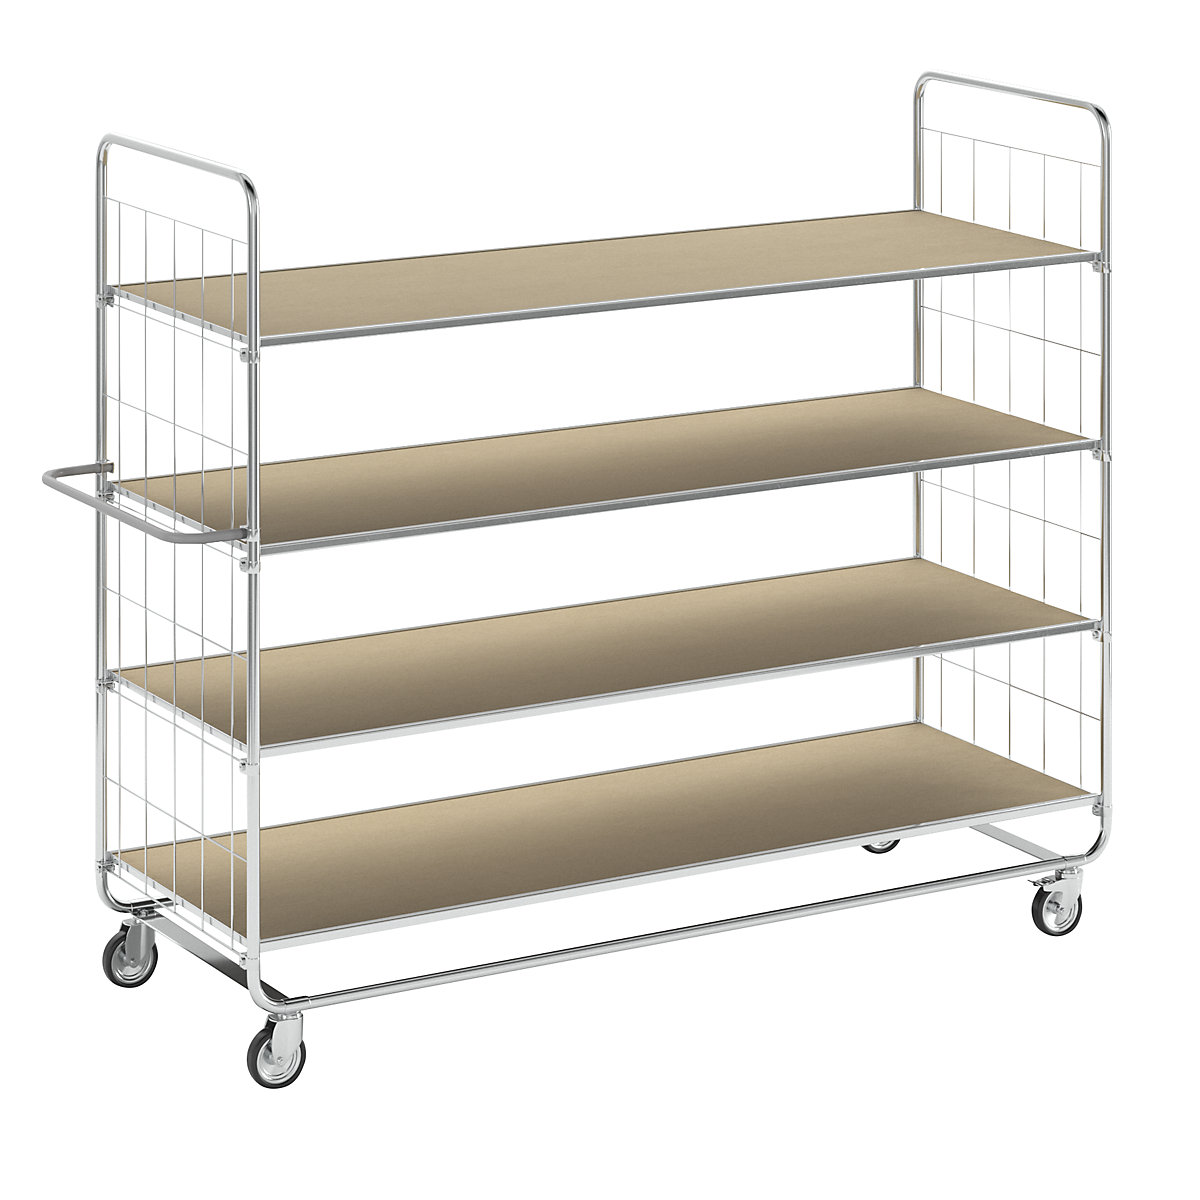 ESD shelf truck, with 4 shelves – Kongamek, 4 castors, 2 with stops, LxWxH 1395 x 470 x 1120 mm, 5+ items-13